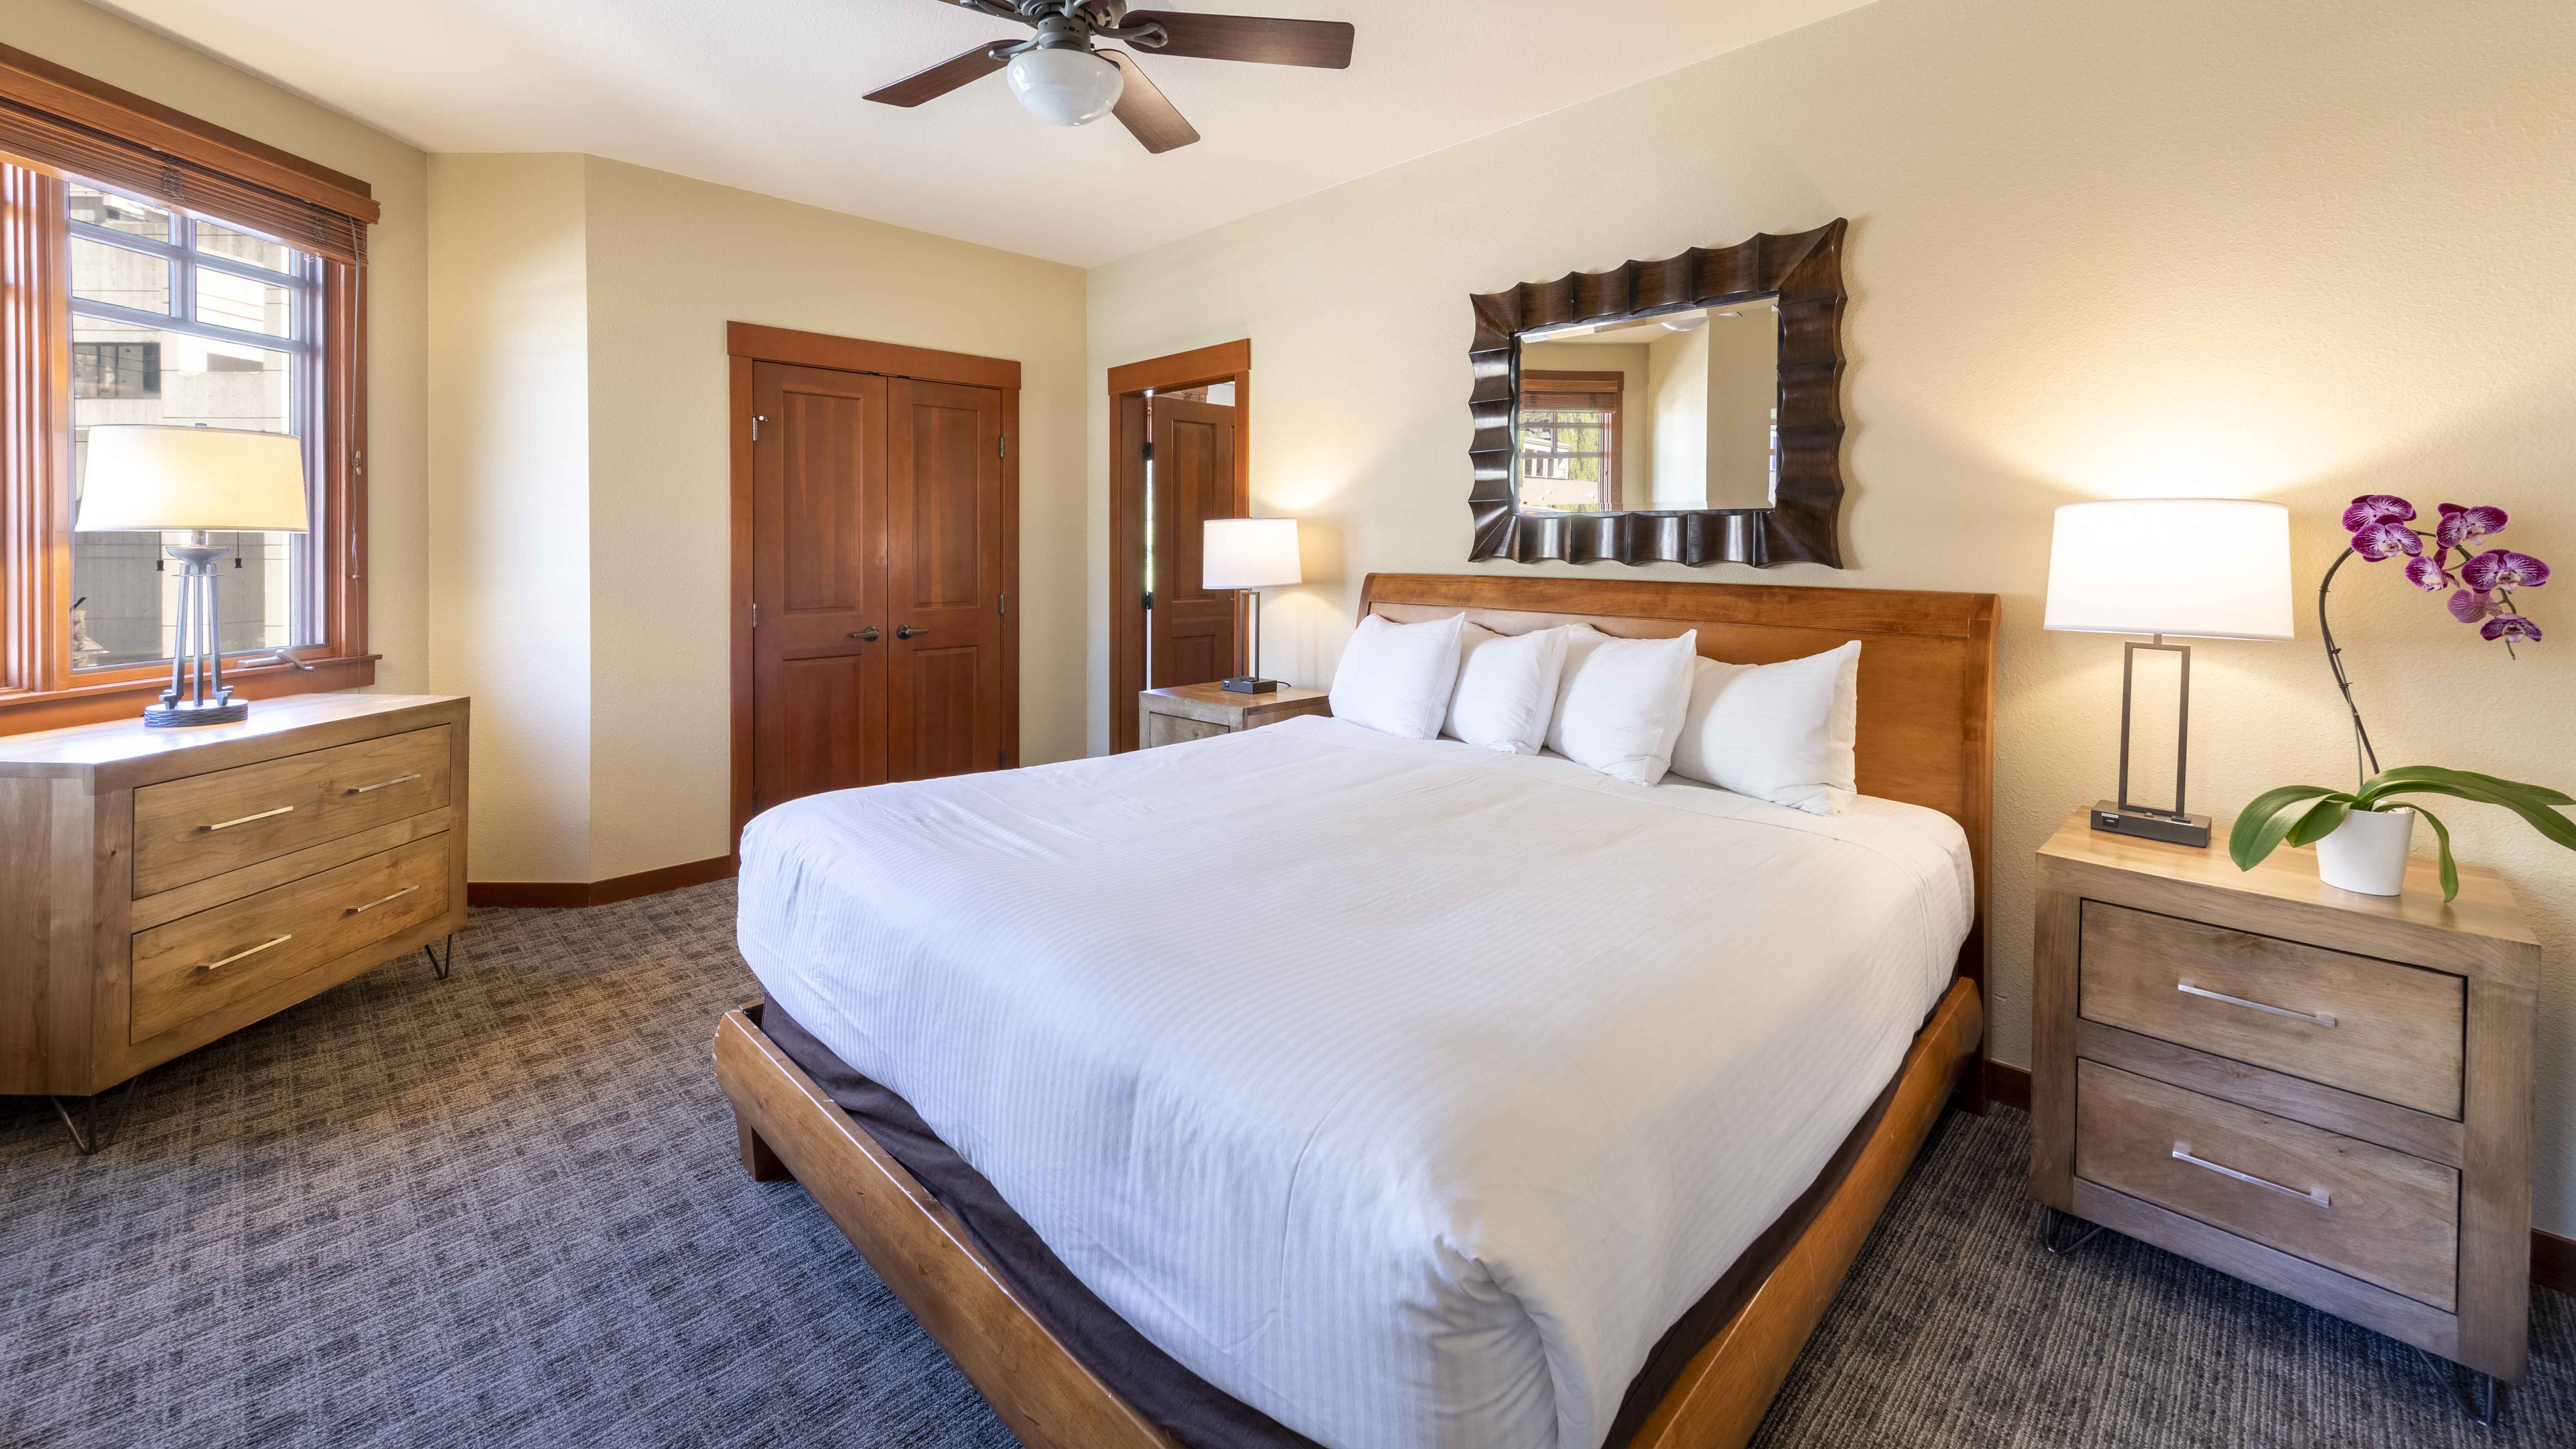 A standard 3 bedroom suite in The Village at Palisades Tahoe.